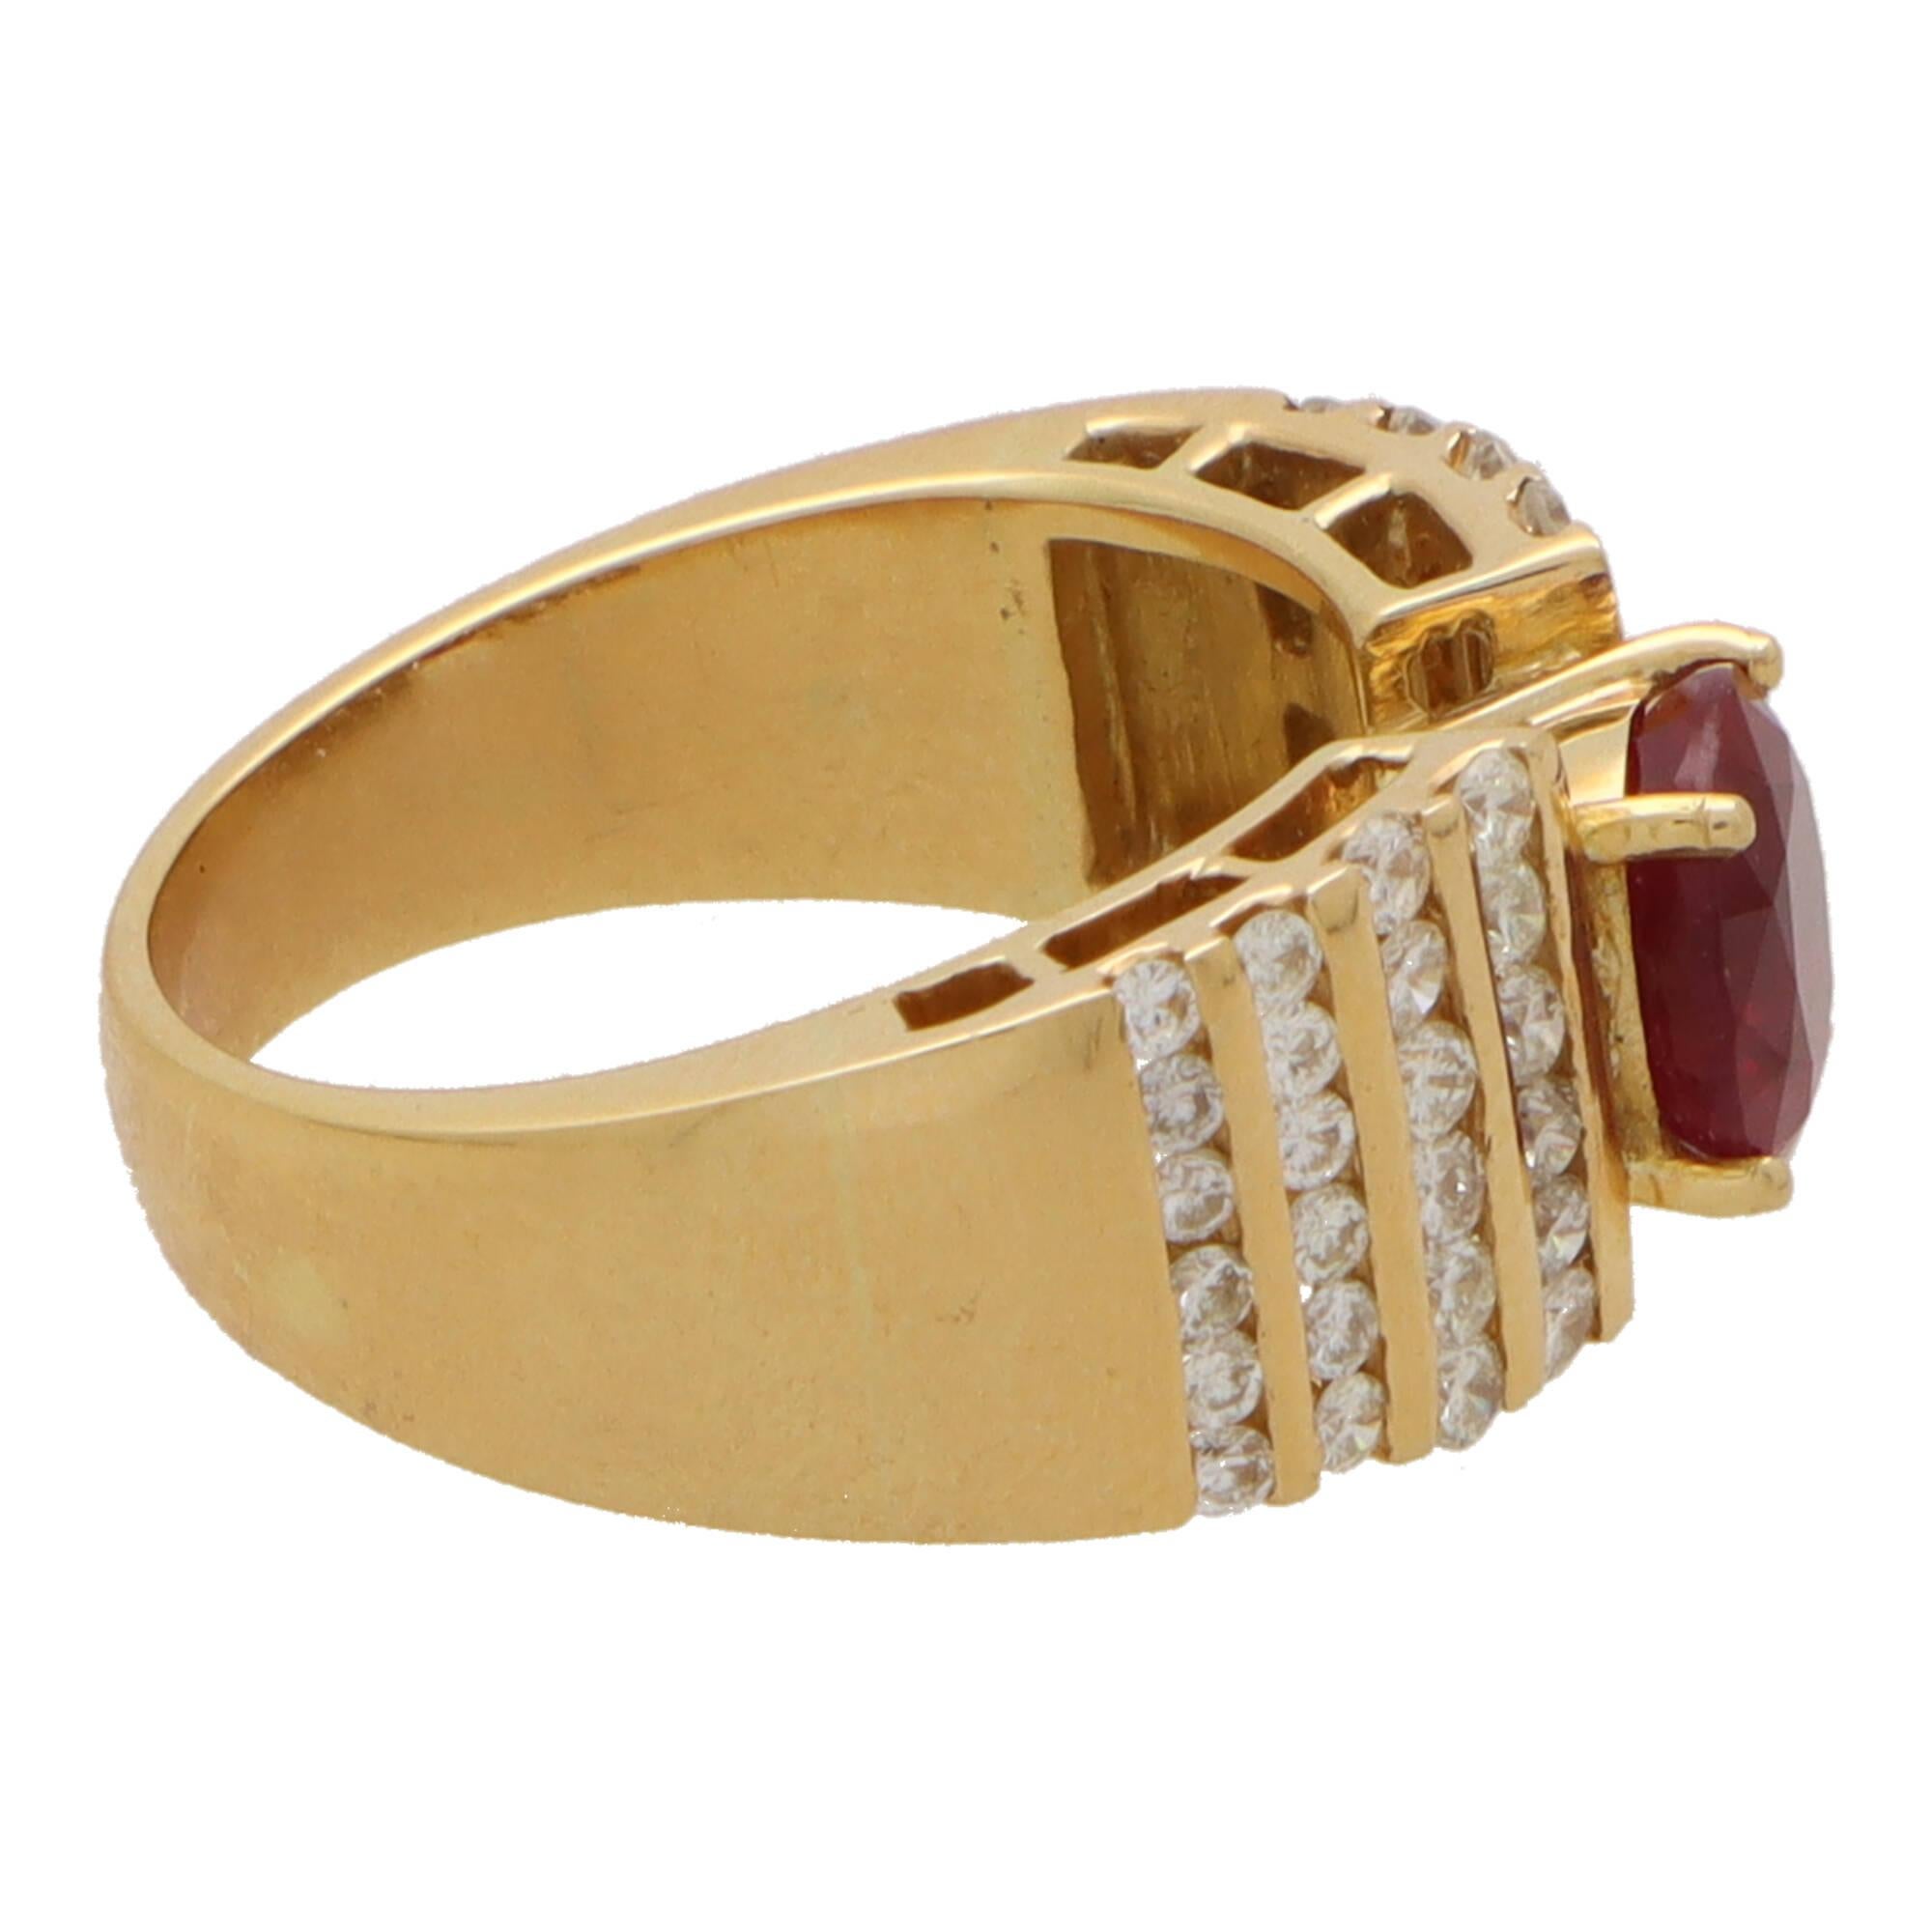  A beautiful vintage ruby and diamond dress ring set in 18k yellow gold.

This unique piece is composed in a bombe design and is centrally set with a vibrant oval cut ruby. The ruby is four claw set securely and is sided by four graduating rows of